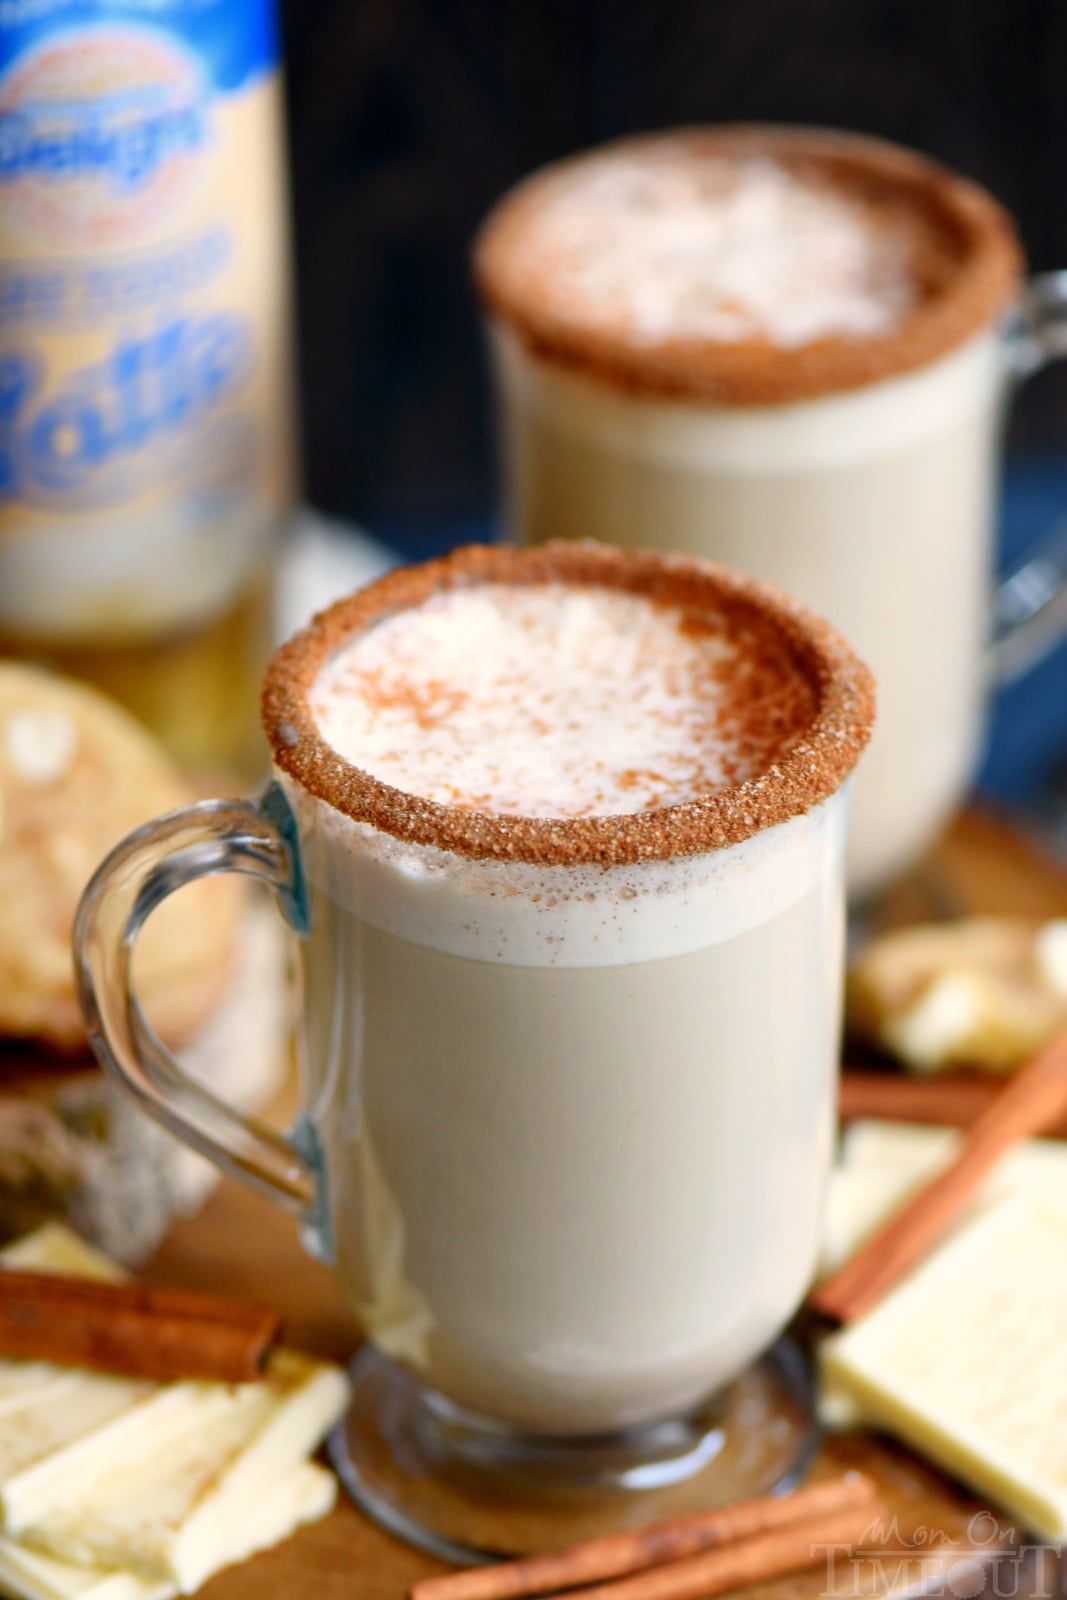 Homemade Snickerdoodle Lattes